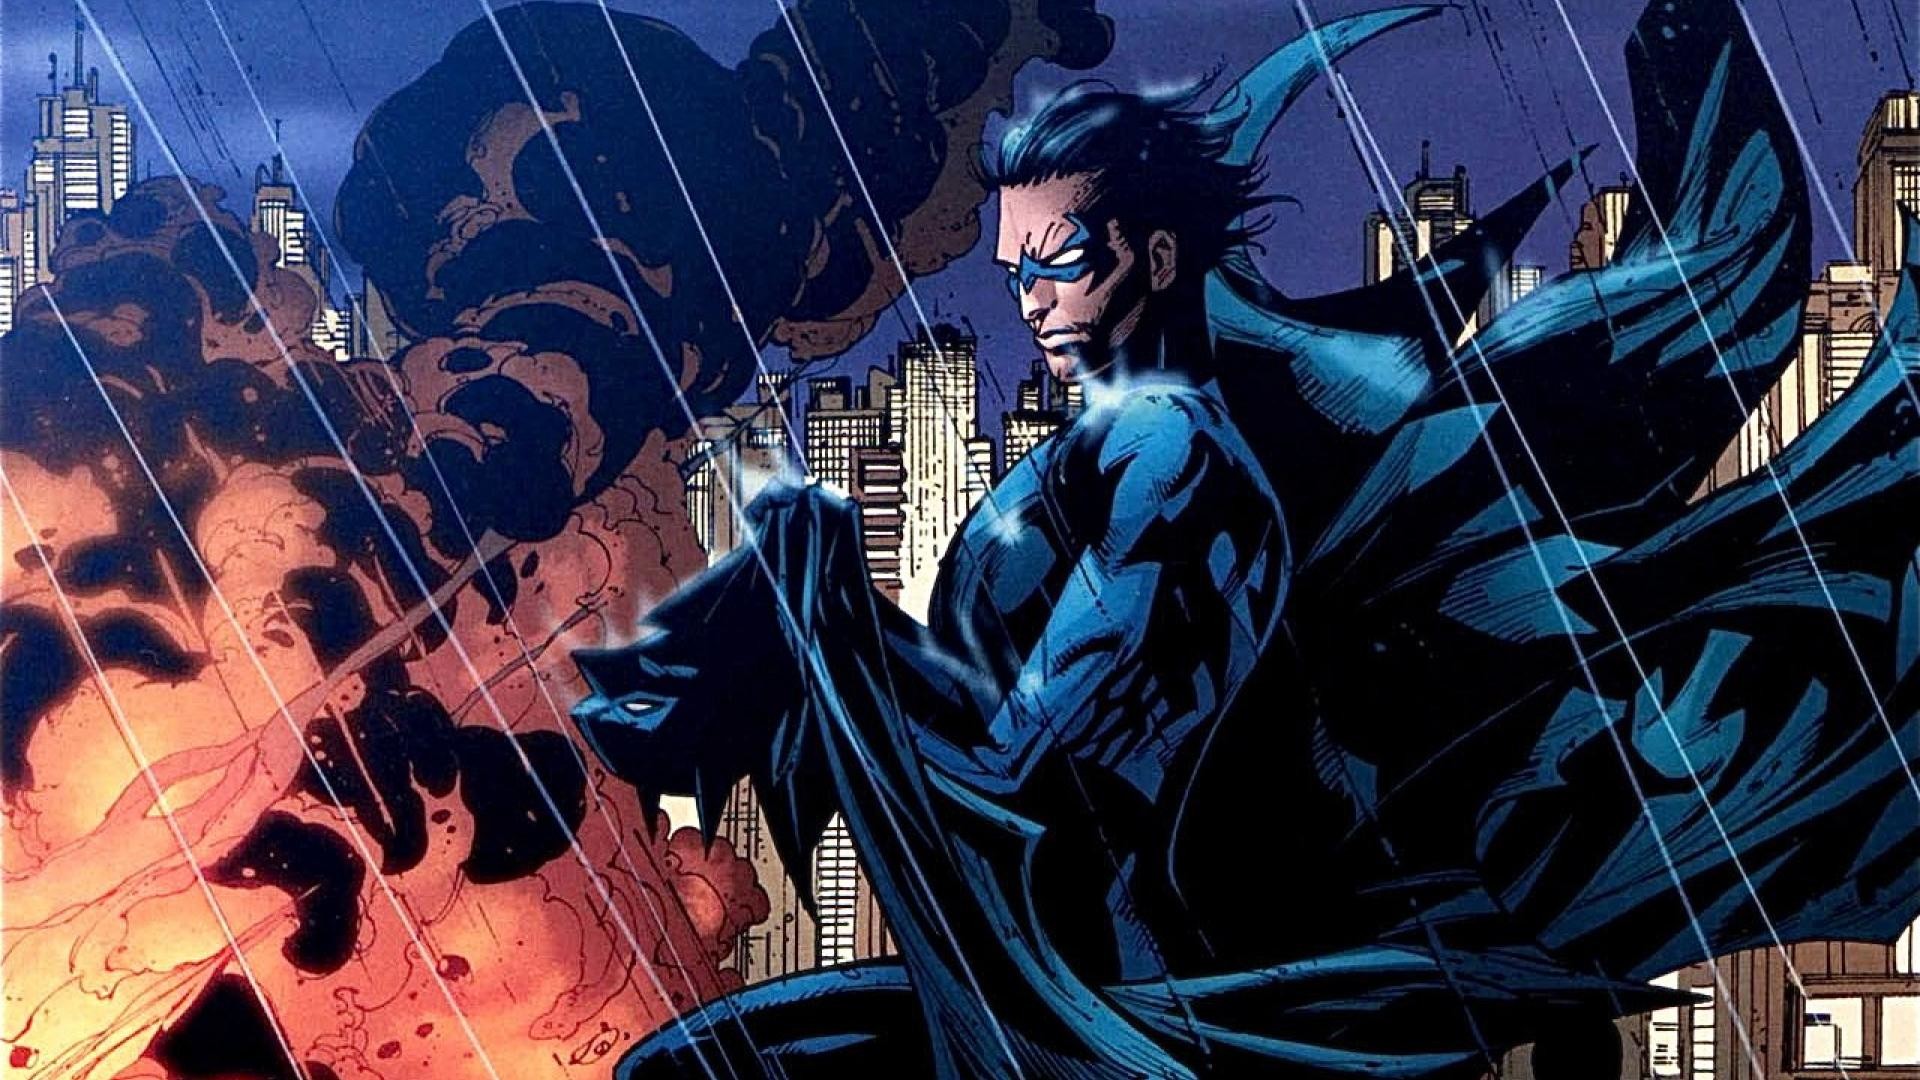 1920x1080 Nightwing holding the cap and cowl of a fallen Batman. Two of my favorite  comic characters.